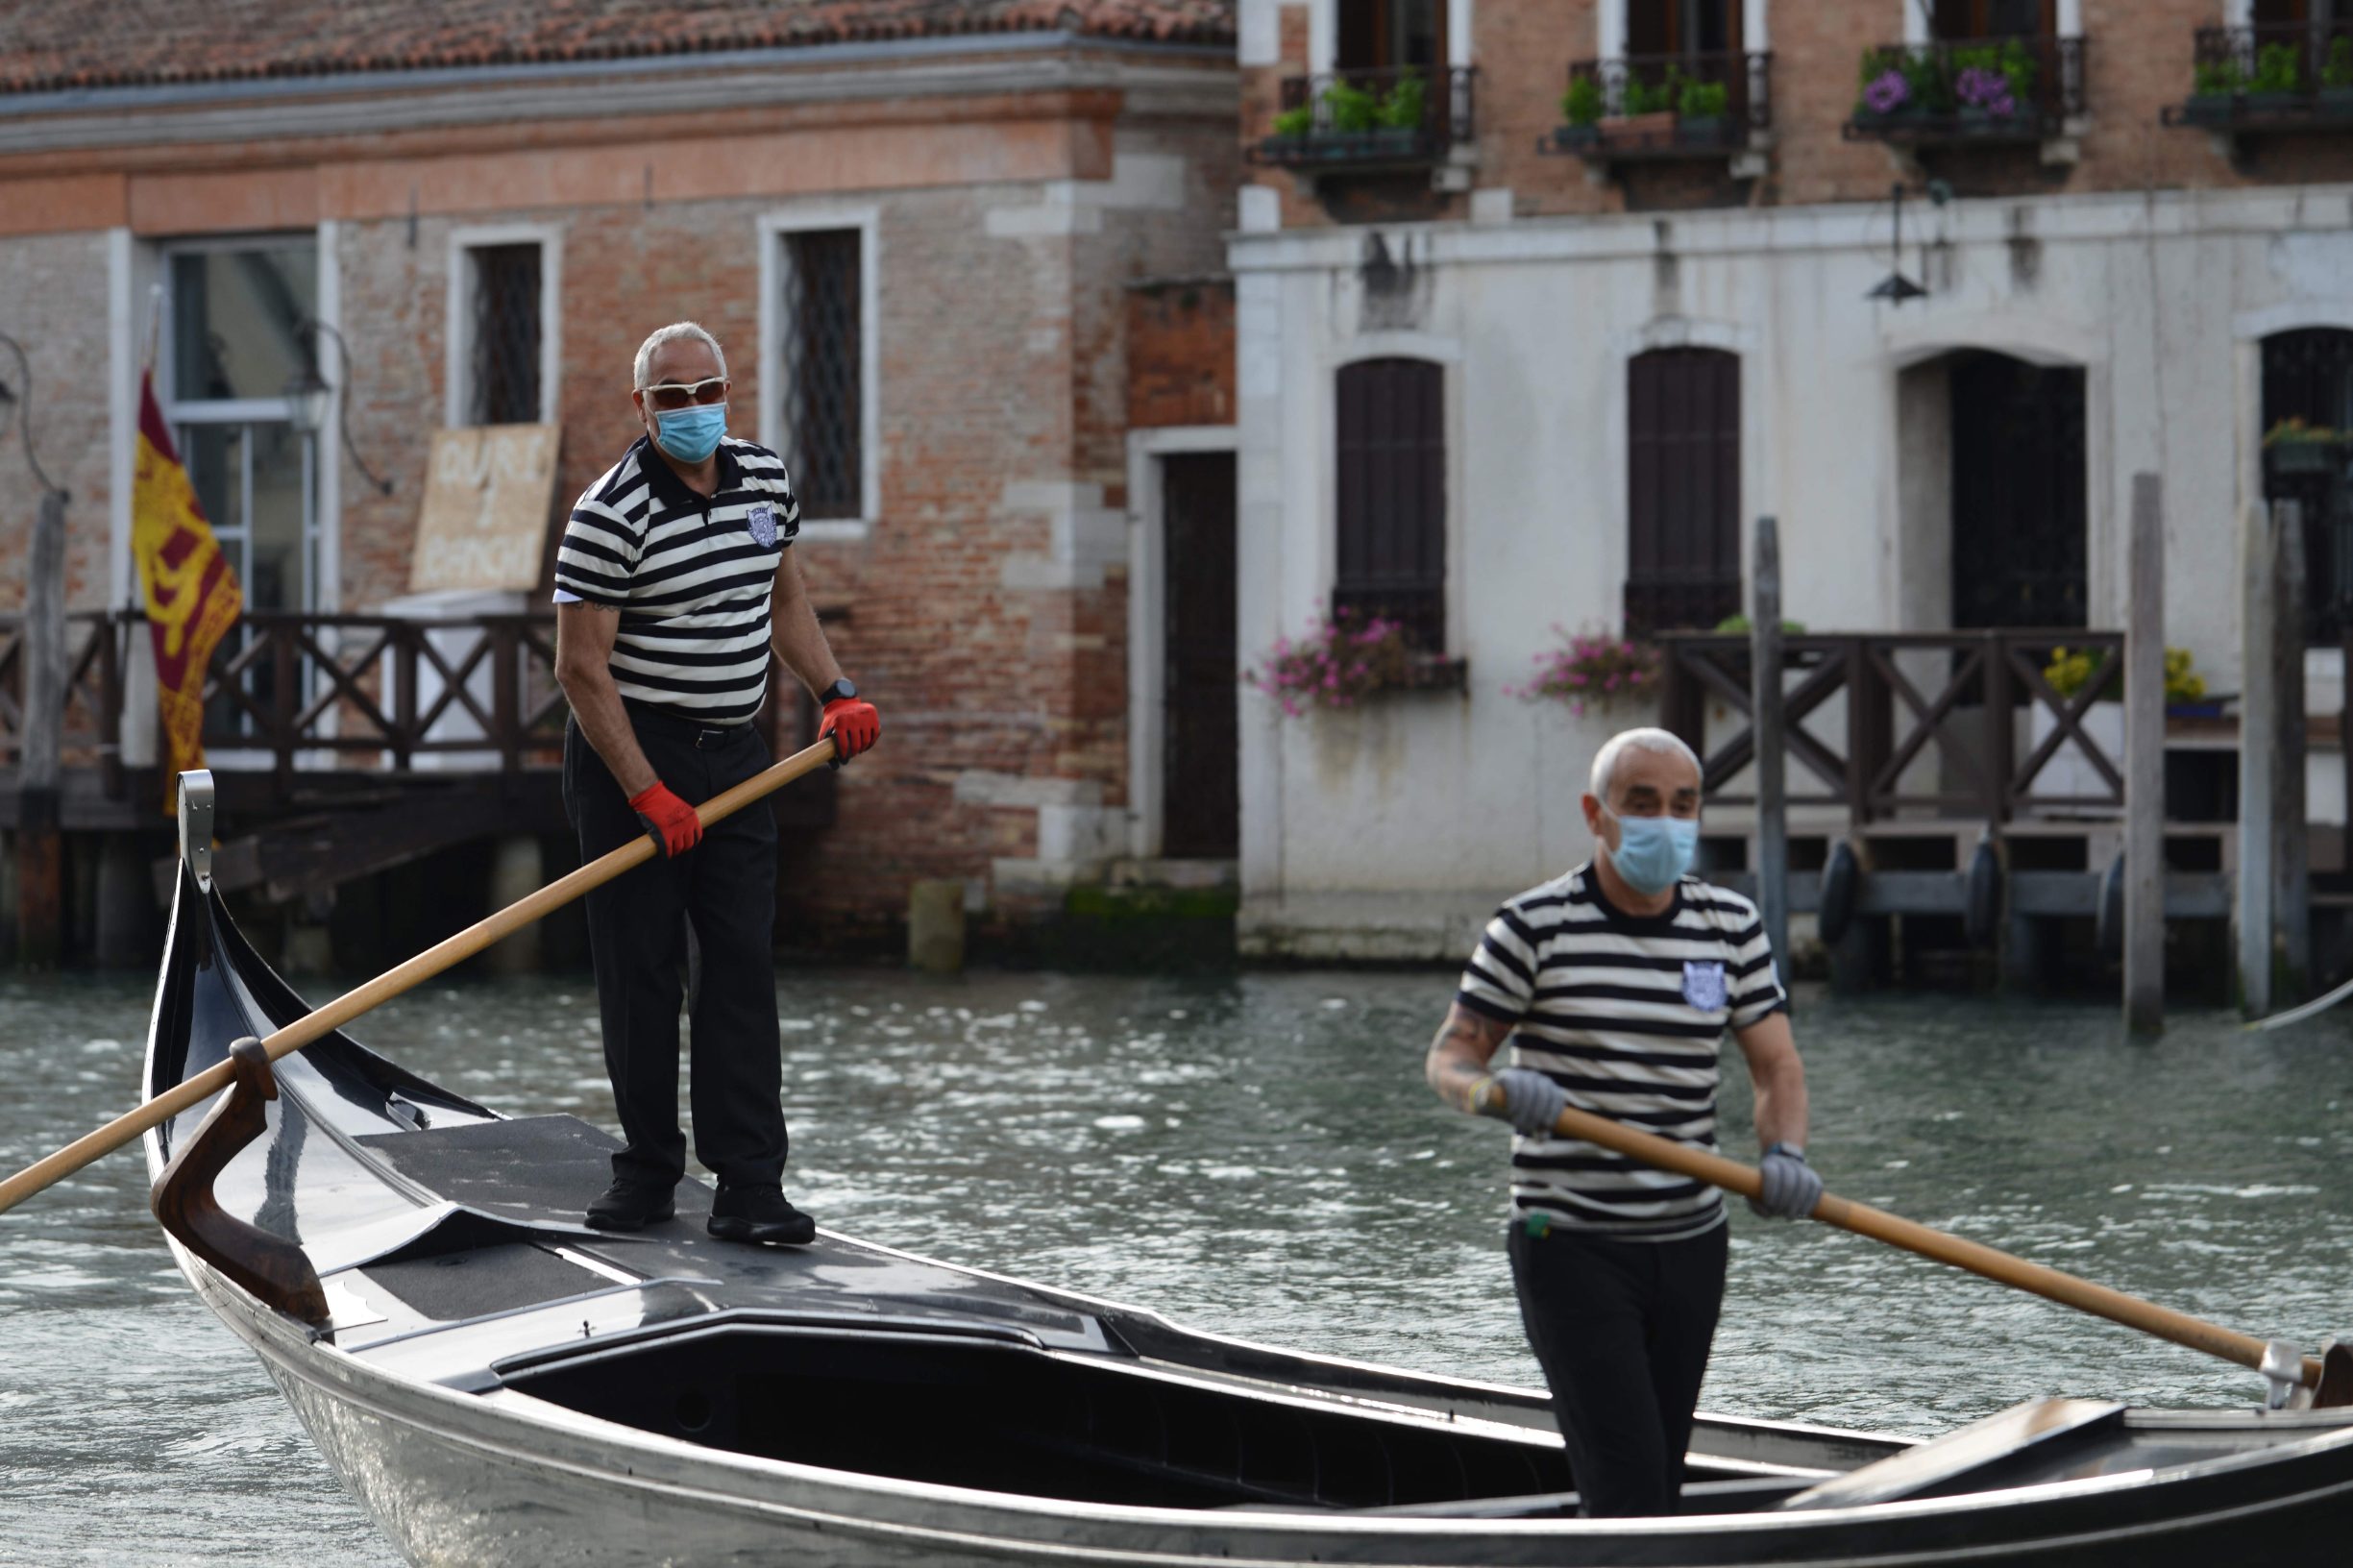 Gondoliers wearing a face mask ride a gondola by the San Toma embankment on a Venice canal as they resume service on May 18, 2020 during the country's lockdown aimed at curbing the spread of the COVID-19 infection, caused by the novel coronavirus. - Restaurants and churches reopen in Italy on May 18, 2020 as part of a fresh wave of lockdown easing in Europe and the country's latest step in a cautious, gradual return to normality, allowing businesses and churches to reopen after a two-month lockdown. (Photo by ANDREA PATTARO / AFP)